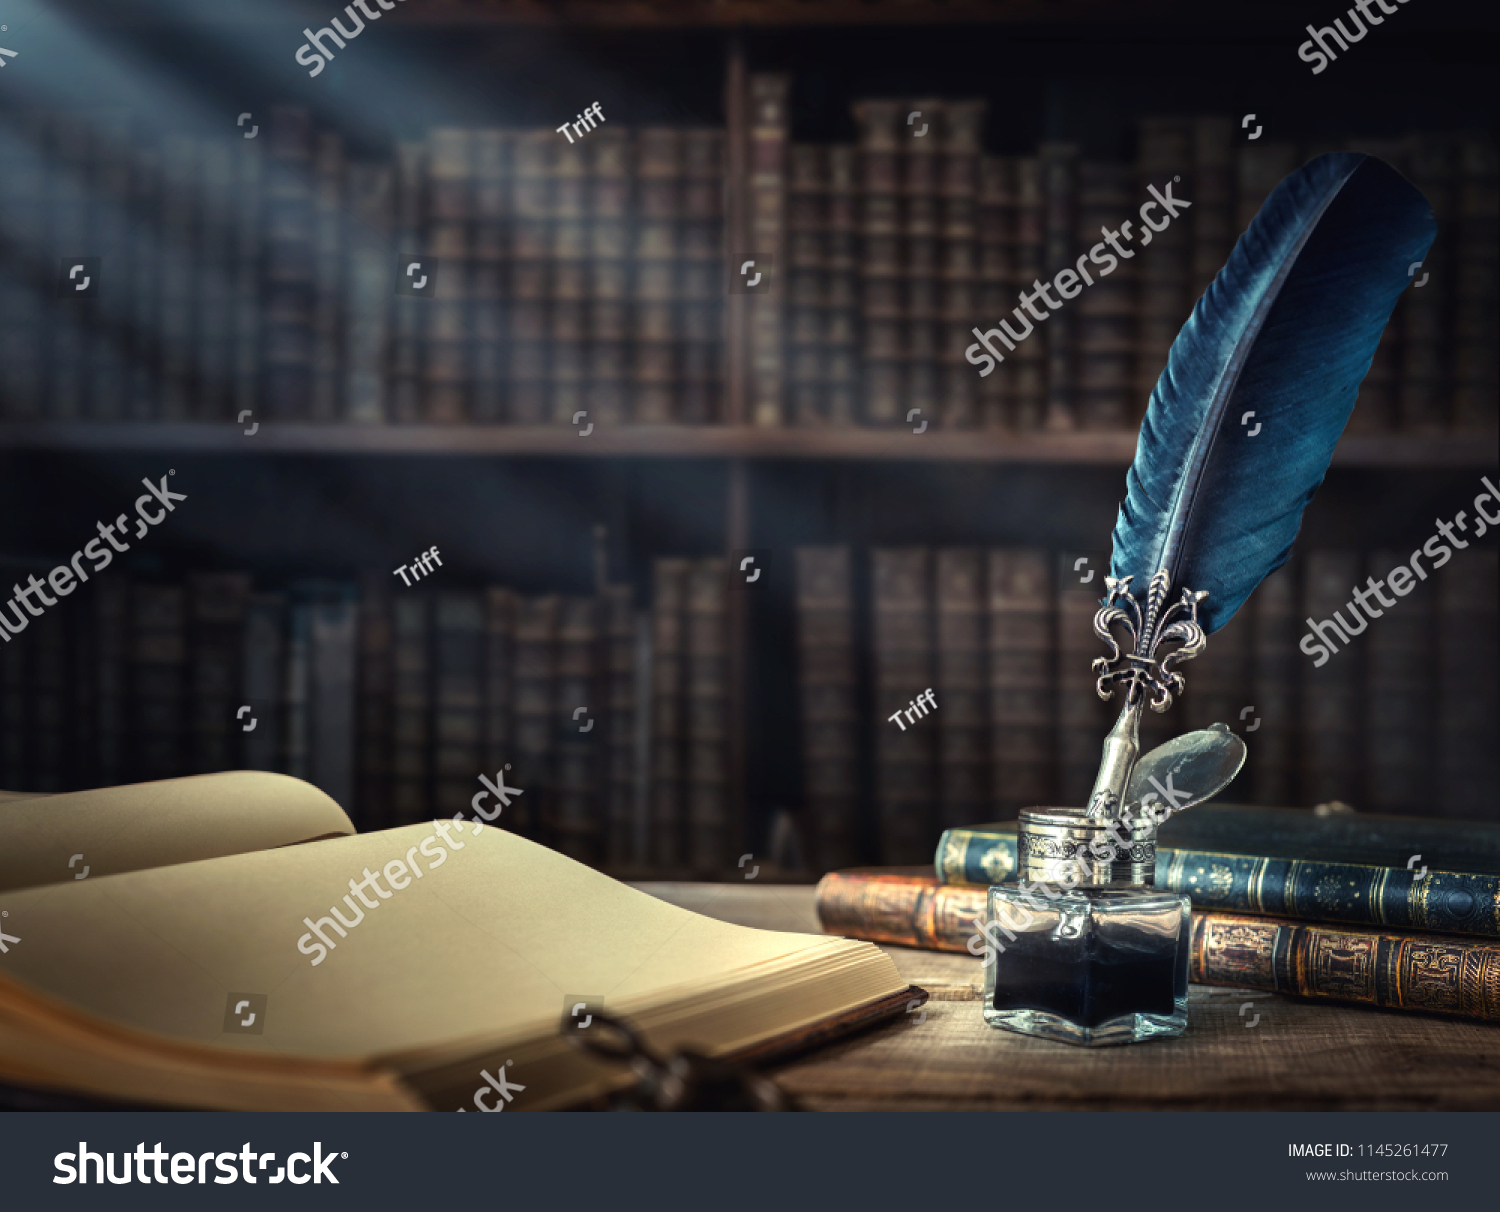 Old quill pen, books and vintage inkwell on wooden desk in the old office against the background of the bookcase and the rays of light. Conceptual background on history, education, literature topics. #1145261477